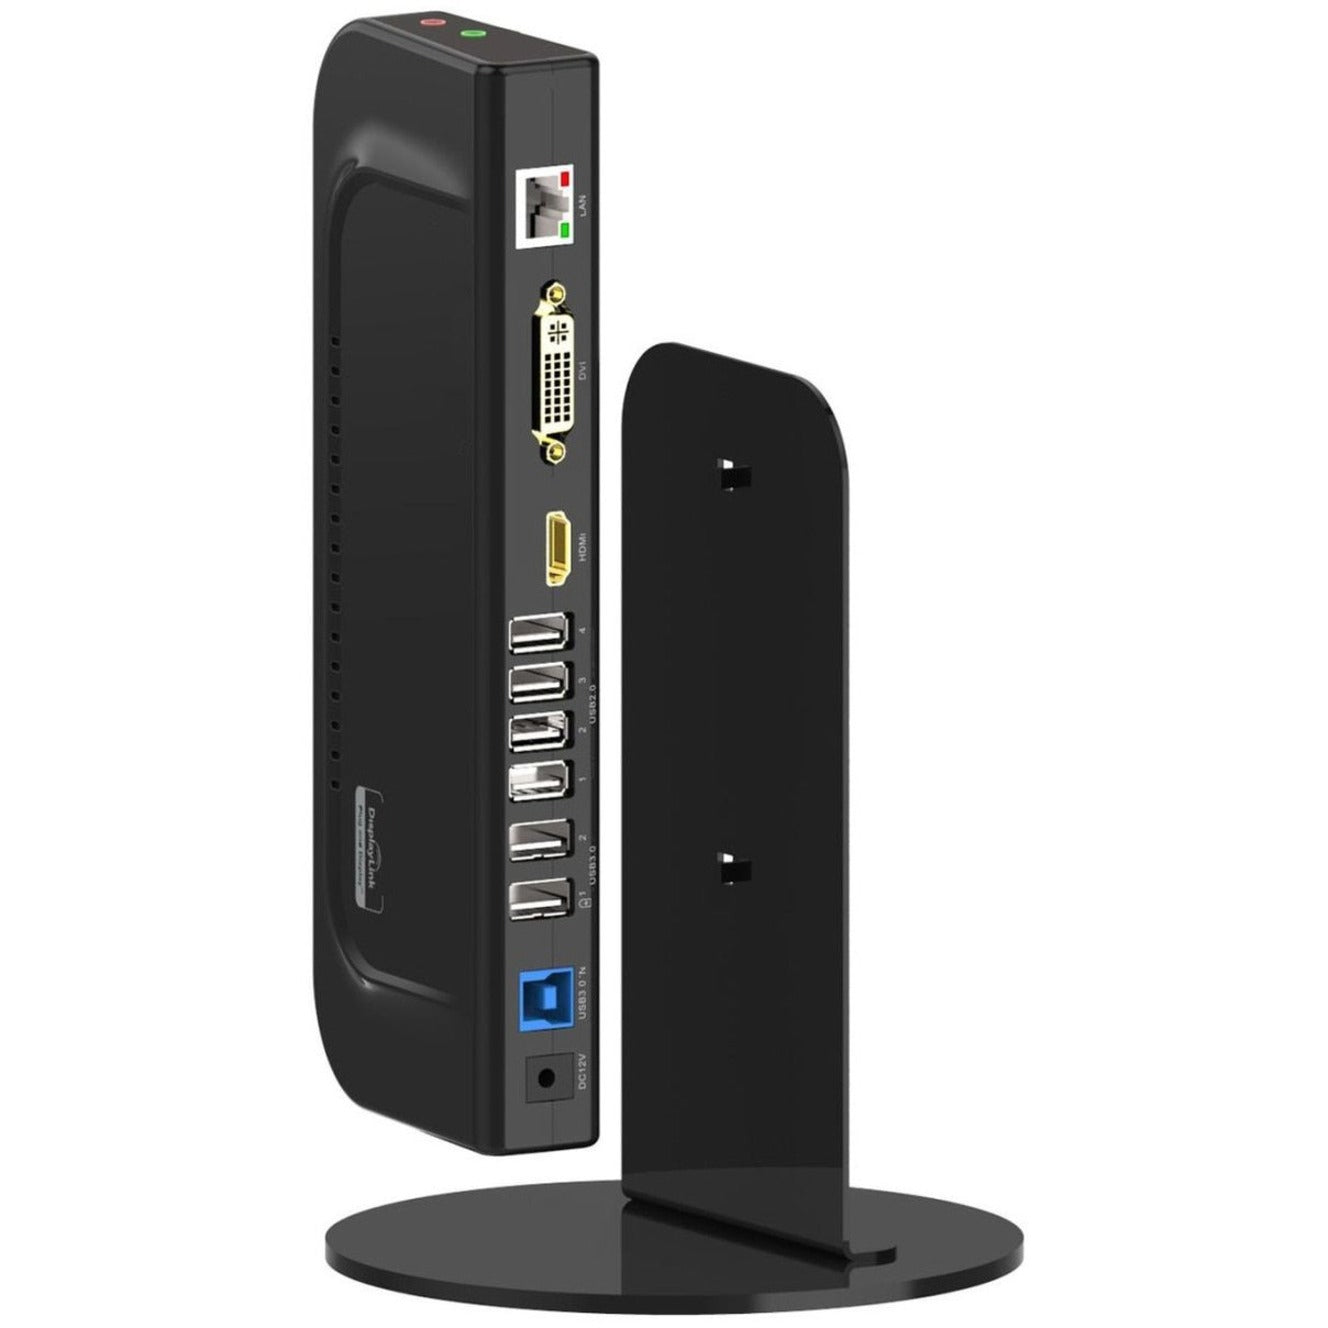 4XEM 4XUG39DK4V USB 3.0 Universal Docking Station B with Vertical Stand, DVI, HDMI, USB Ports, RJ-45, Audio In/Out